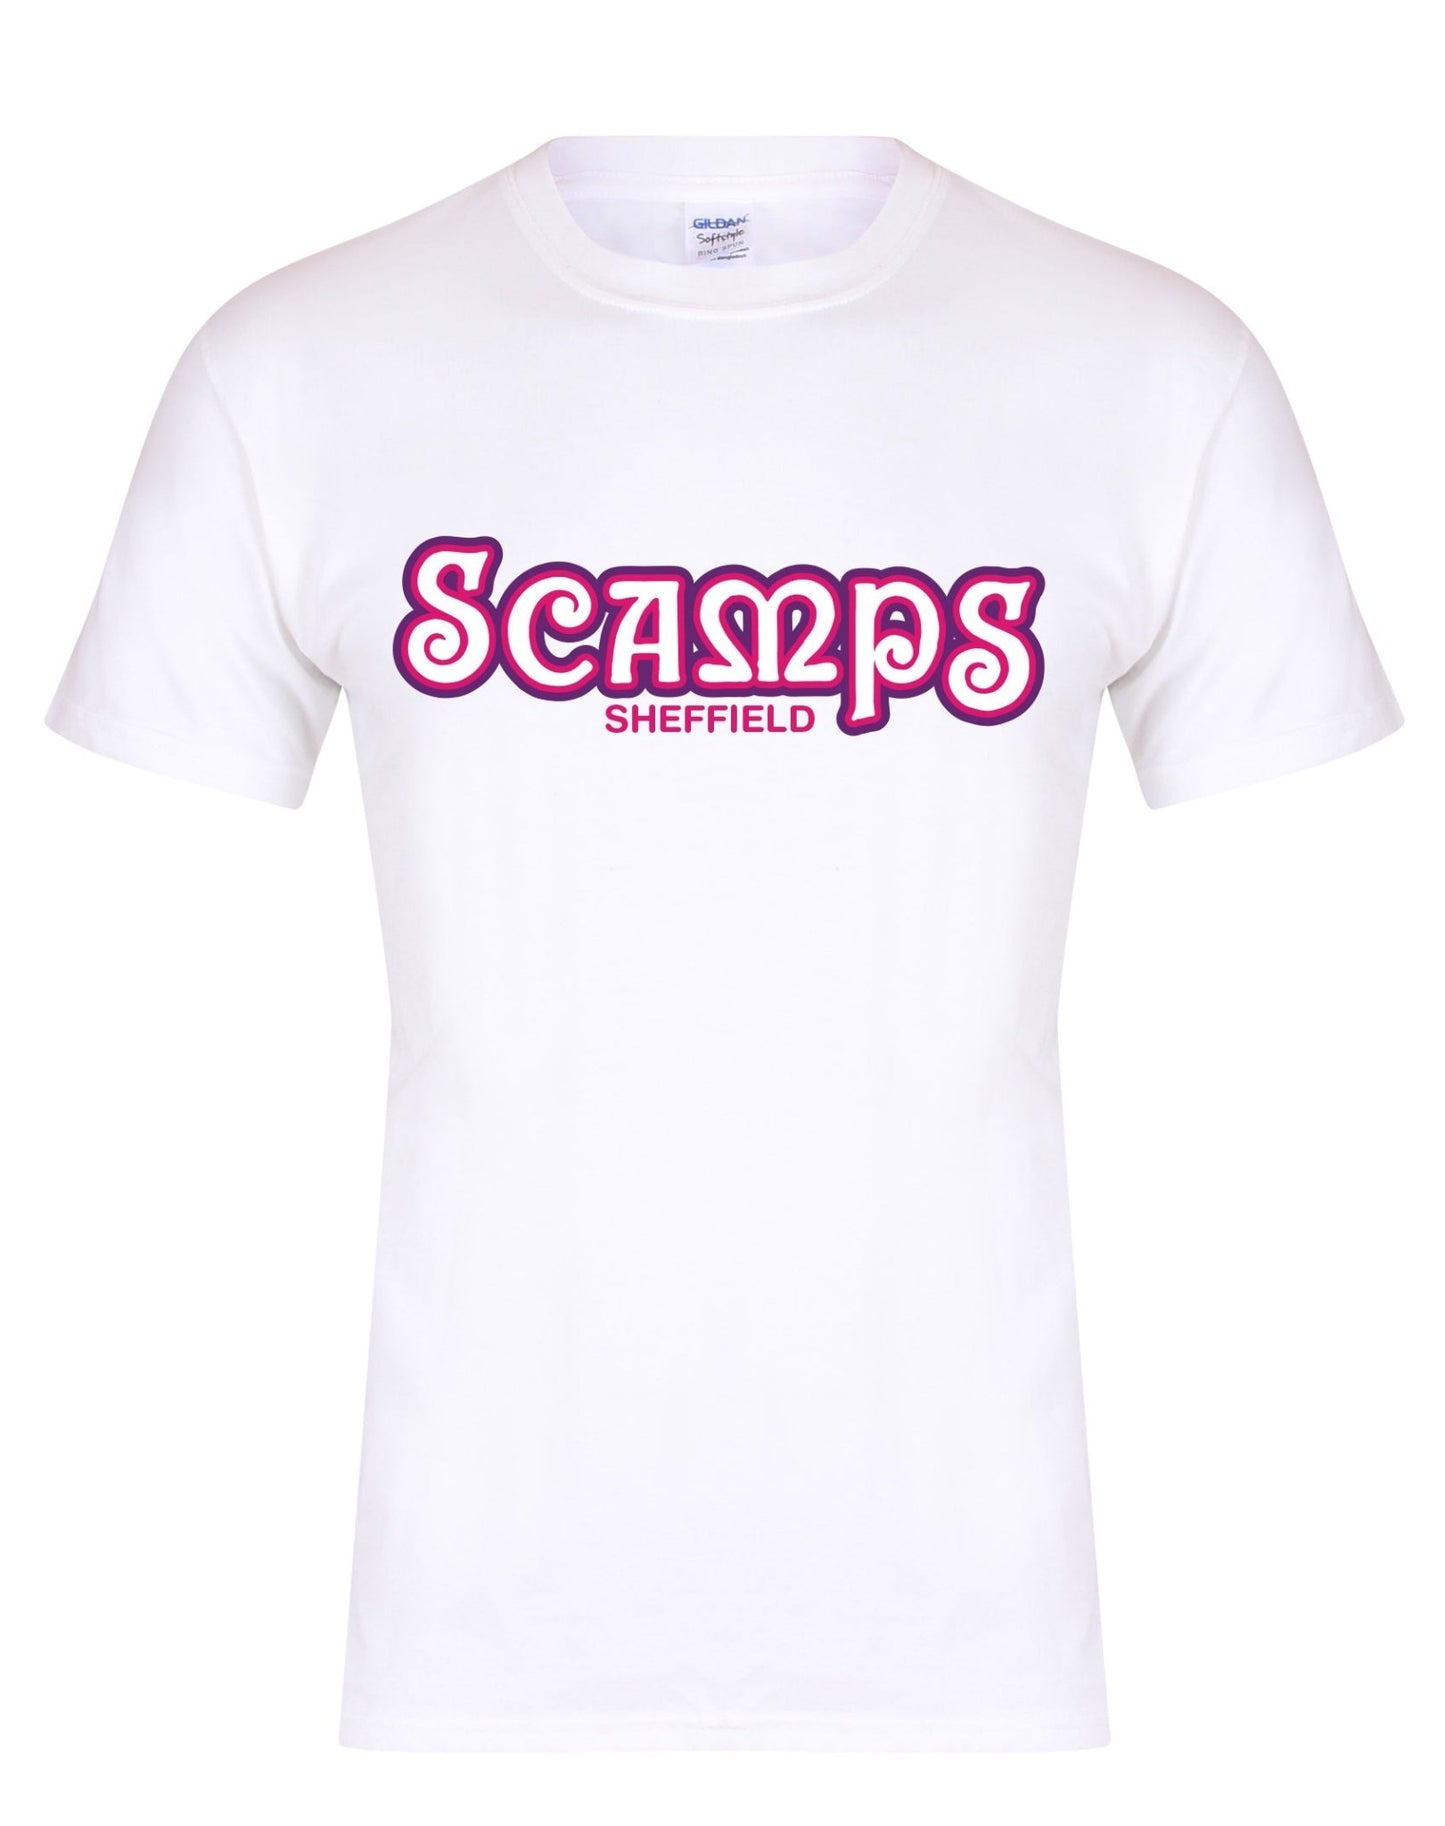 Scamps unisex fit T-shirt - various colours - Dirty Stop Outs